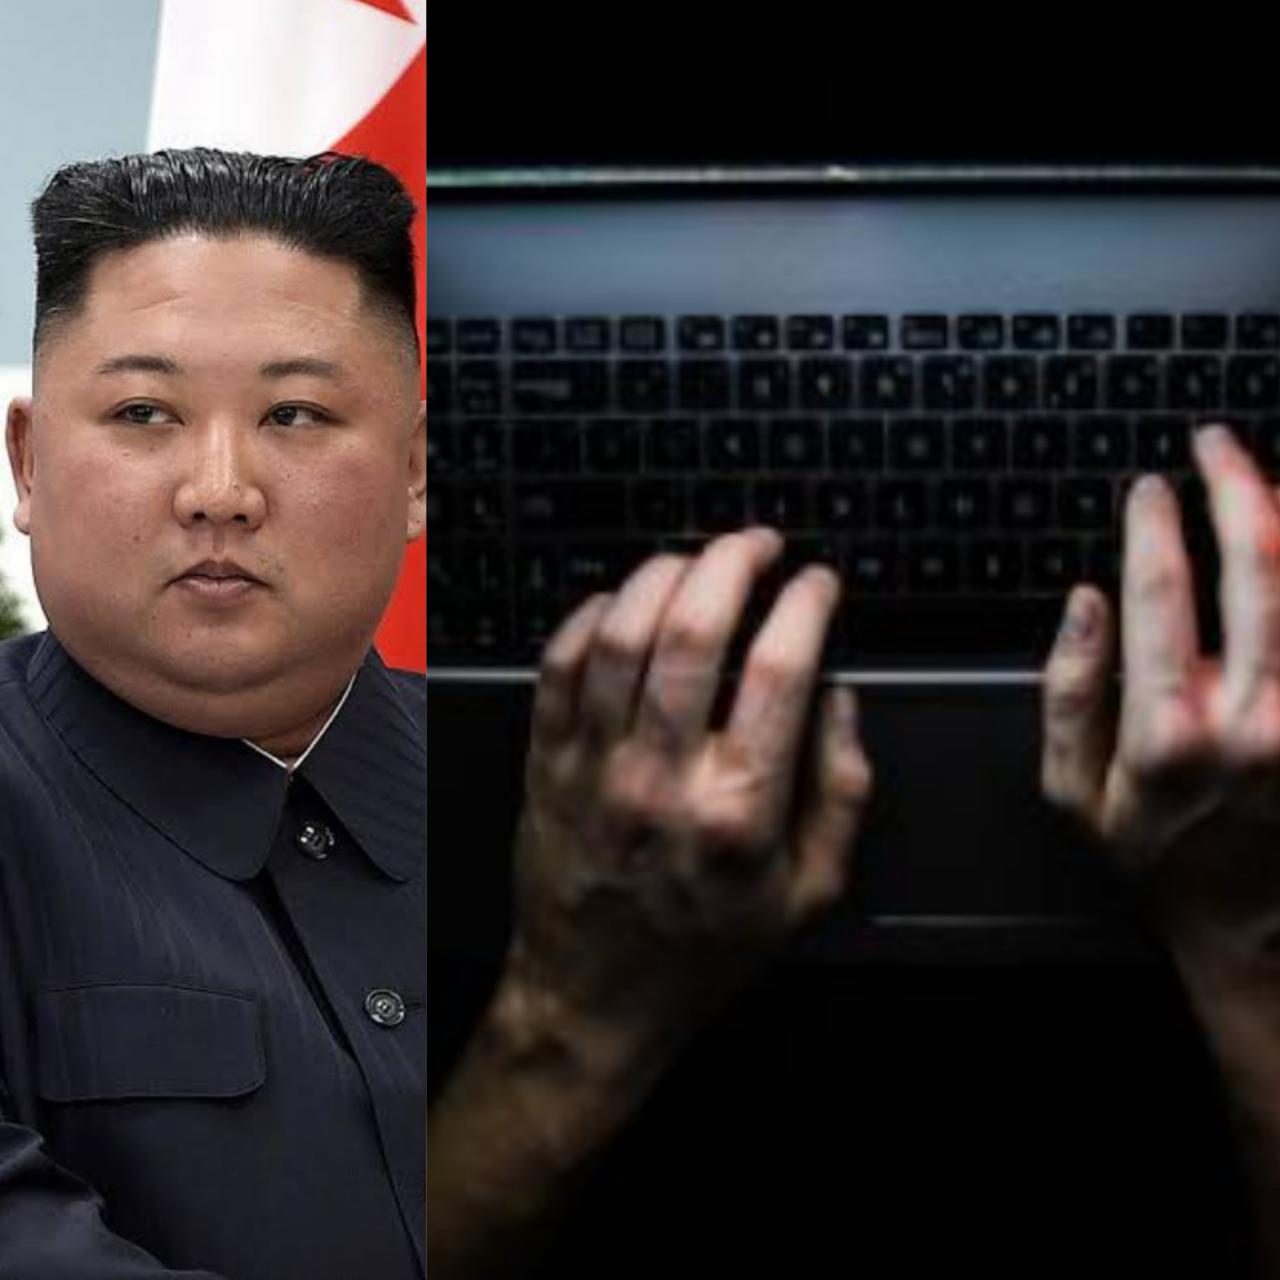 North Korean hackers stole nearly 0 million in cryptocurrency last year - New report claims